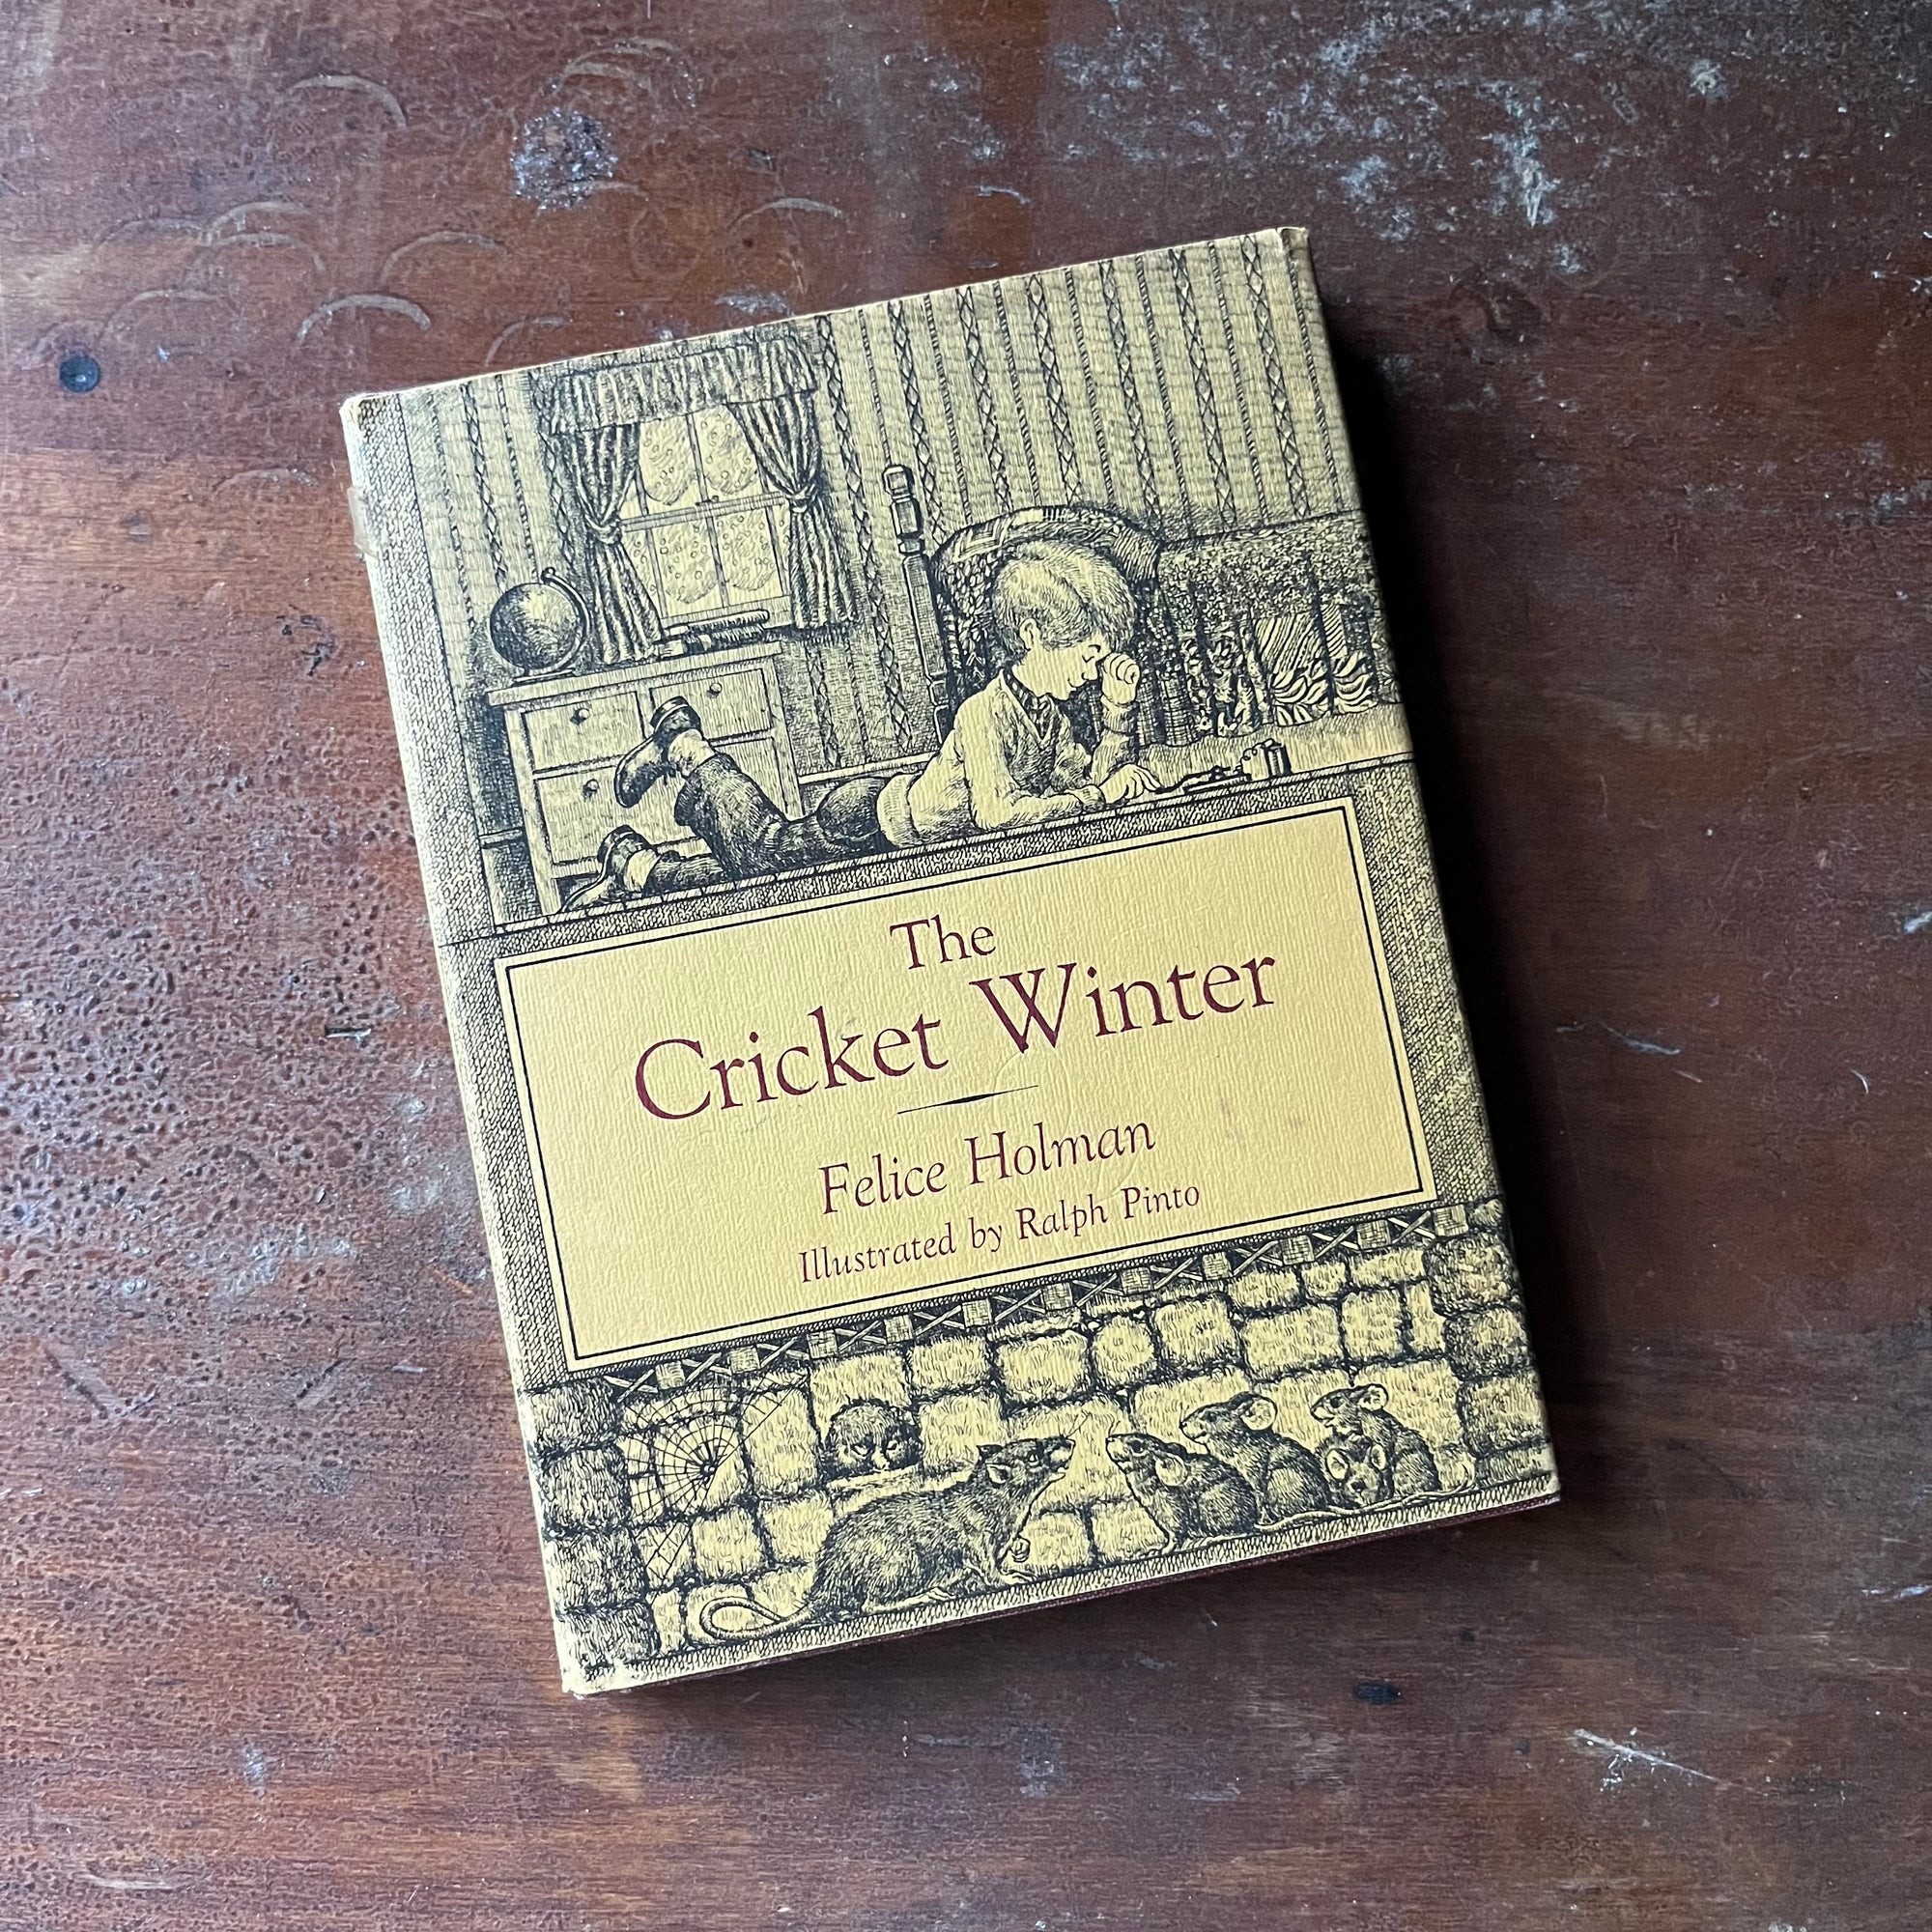 vintage children's chapter book - The Cricket Winter written by Felice Holman with illustrations by Ralph Pinto - view of the dust jacket's front cover